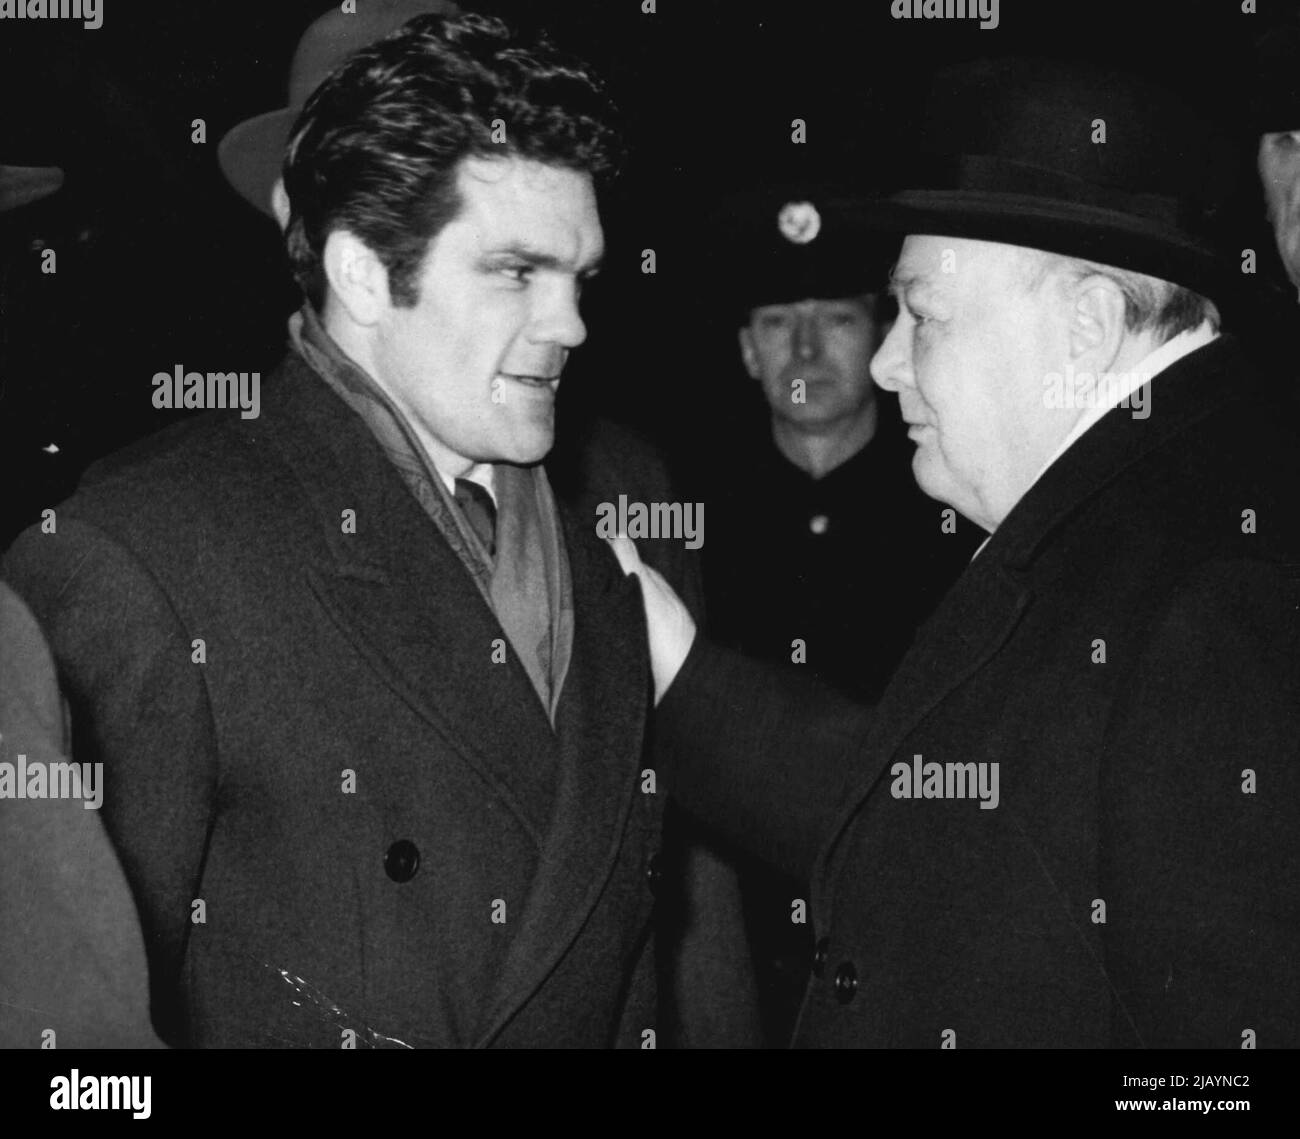 One Champ to Another -- Winston S. Churchill, leader of the British conservative party, gives a friendly pat on the shoulder to boxer Freddie Mills at Paddington station this morning Feb. 8. Freddie was among the people gathered to see Churchill off to Cardiff Churchill will address a mass meeting of 50,000 people at a Cradiff, Wales, football ground as part of his election campaign. February 27, 1950. (Photo by Associated Press Photo). Stock Photo